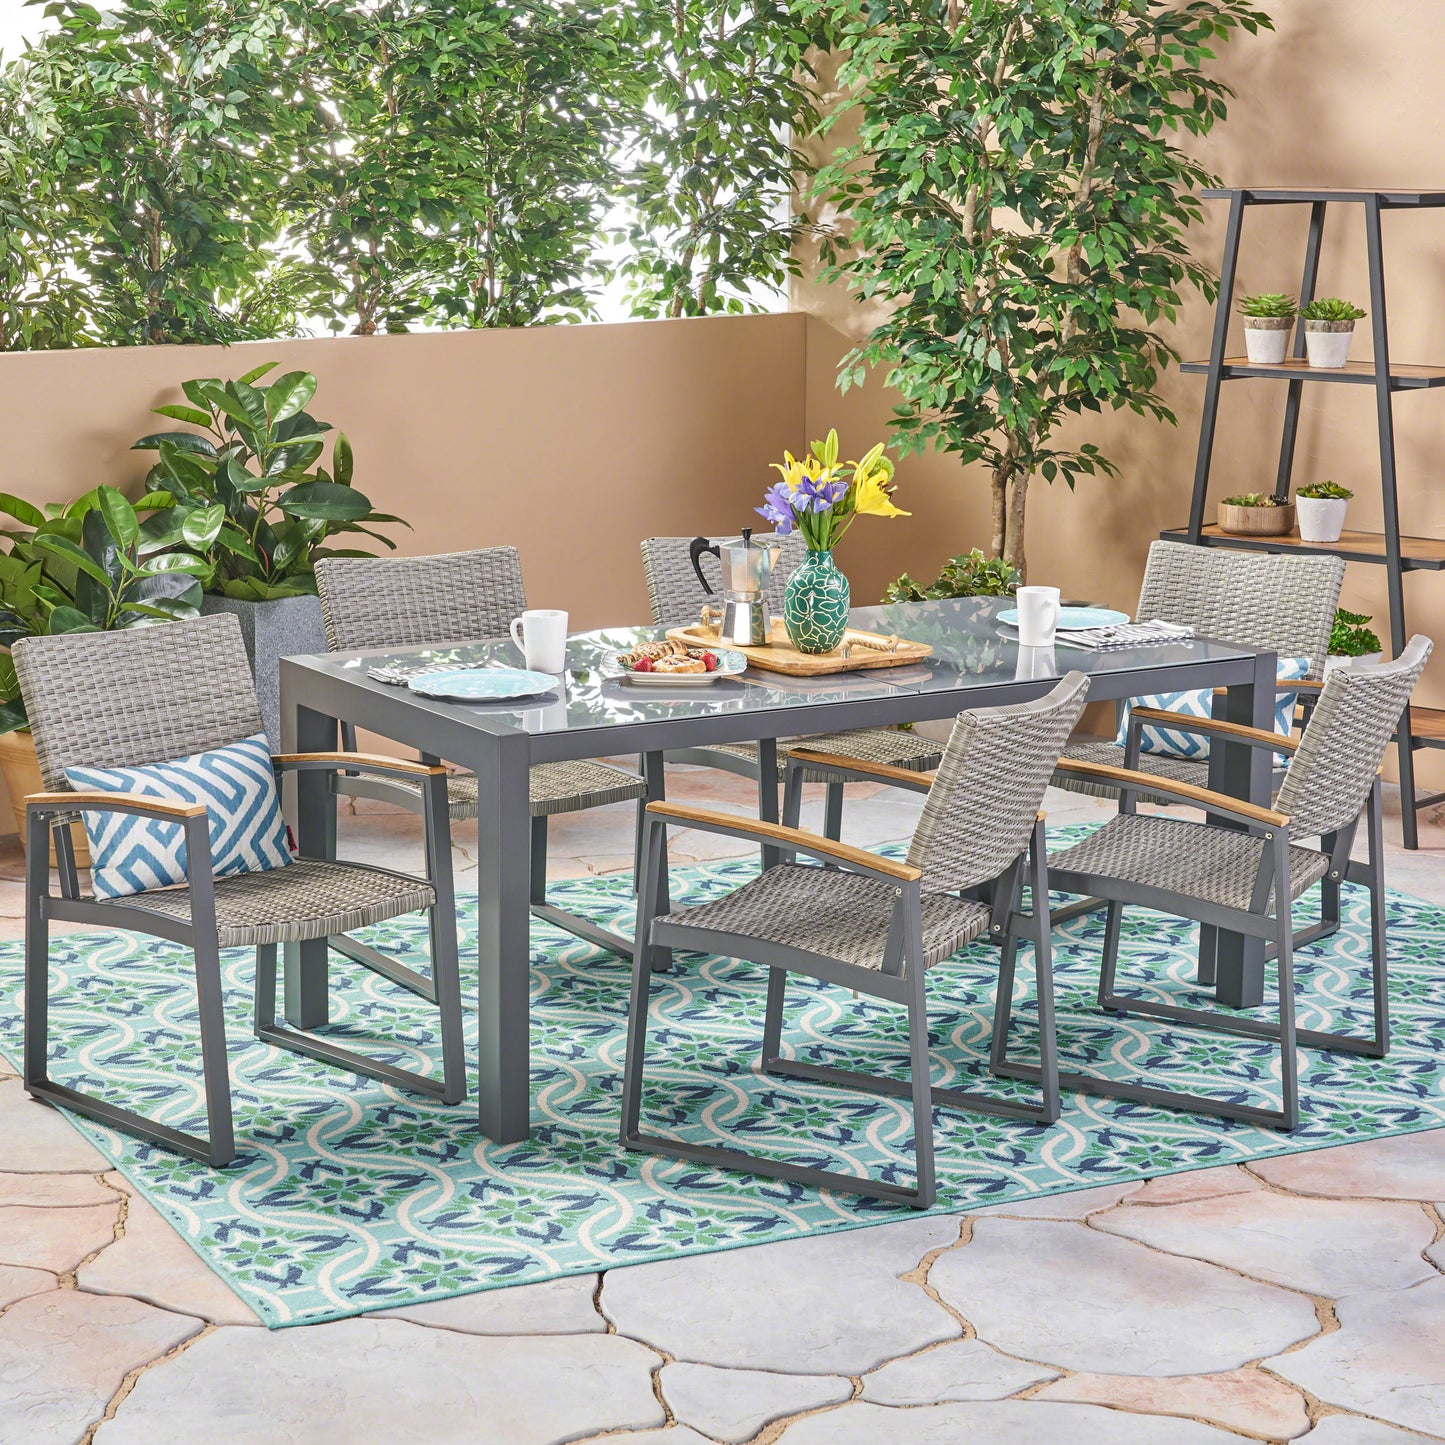 Teina Outdoor Aluminum and Wicker 7 Piece Dining Set with Glass Table Top, Gray and Gray